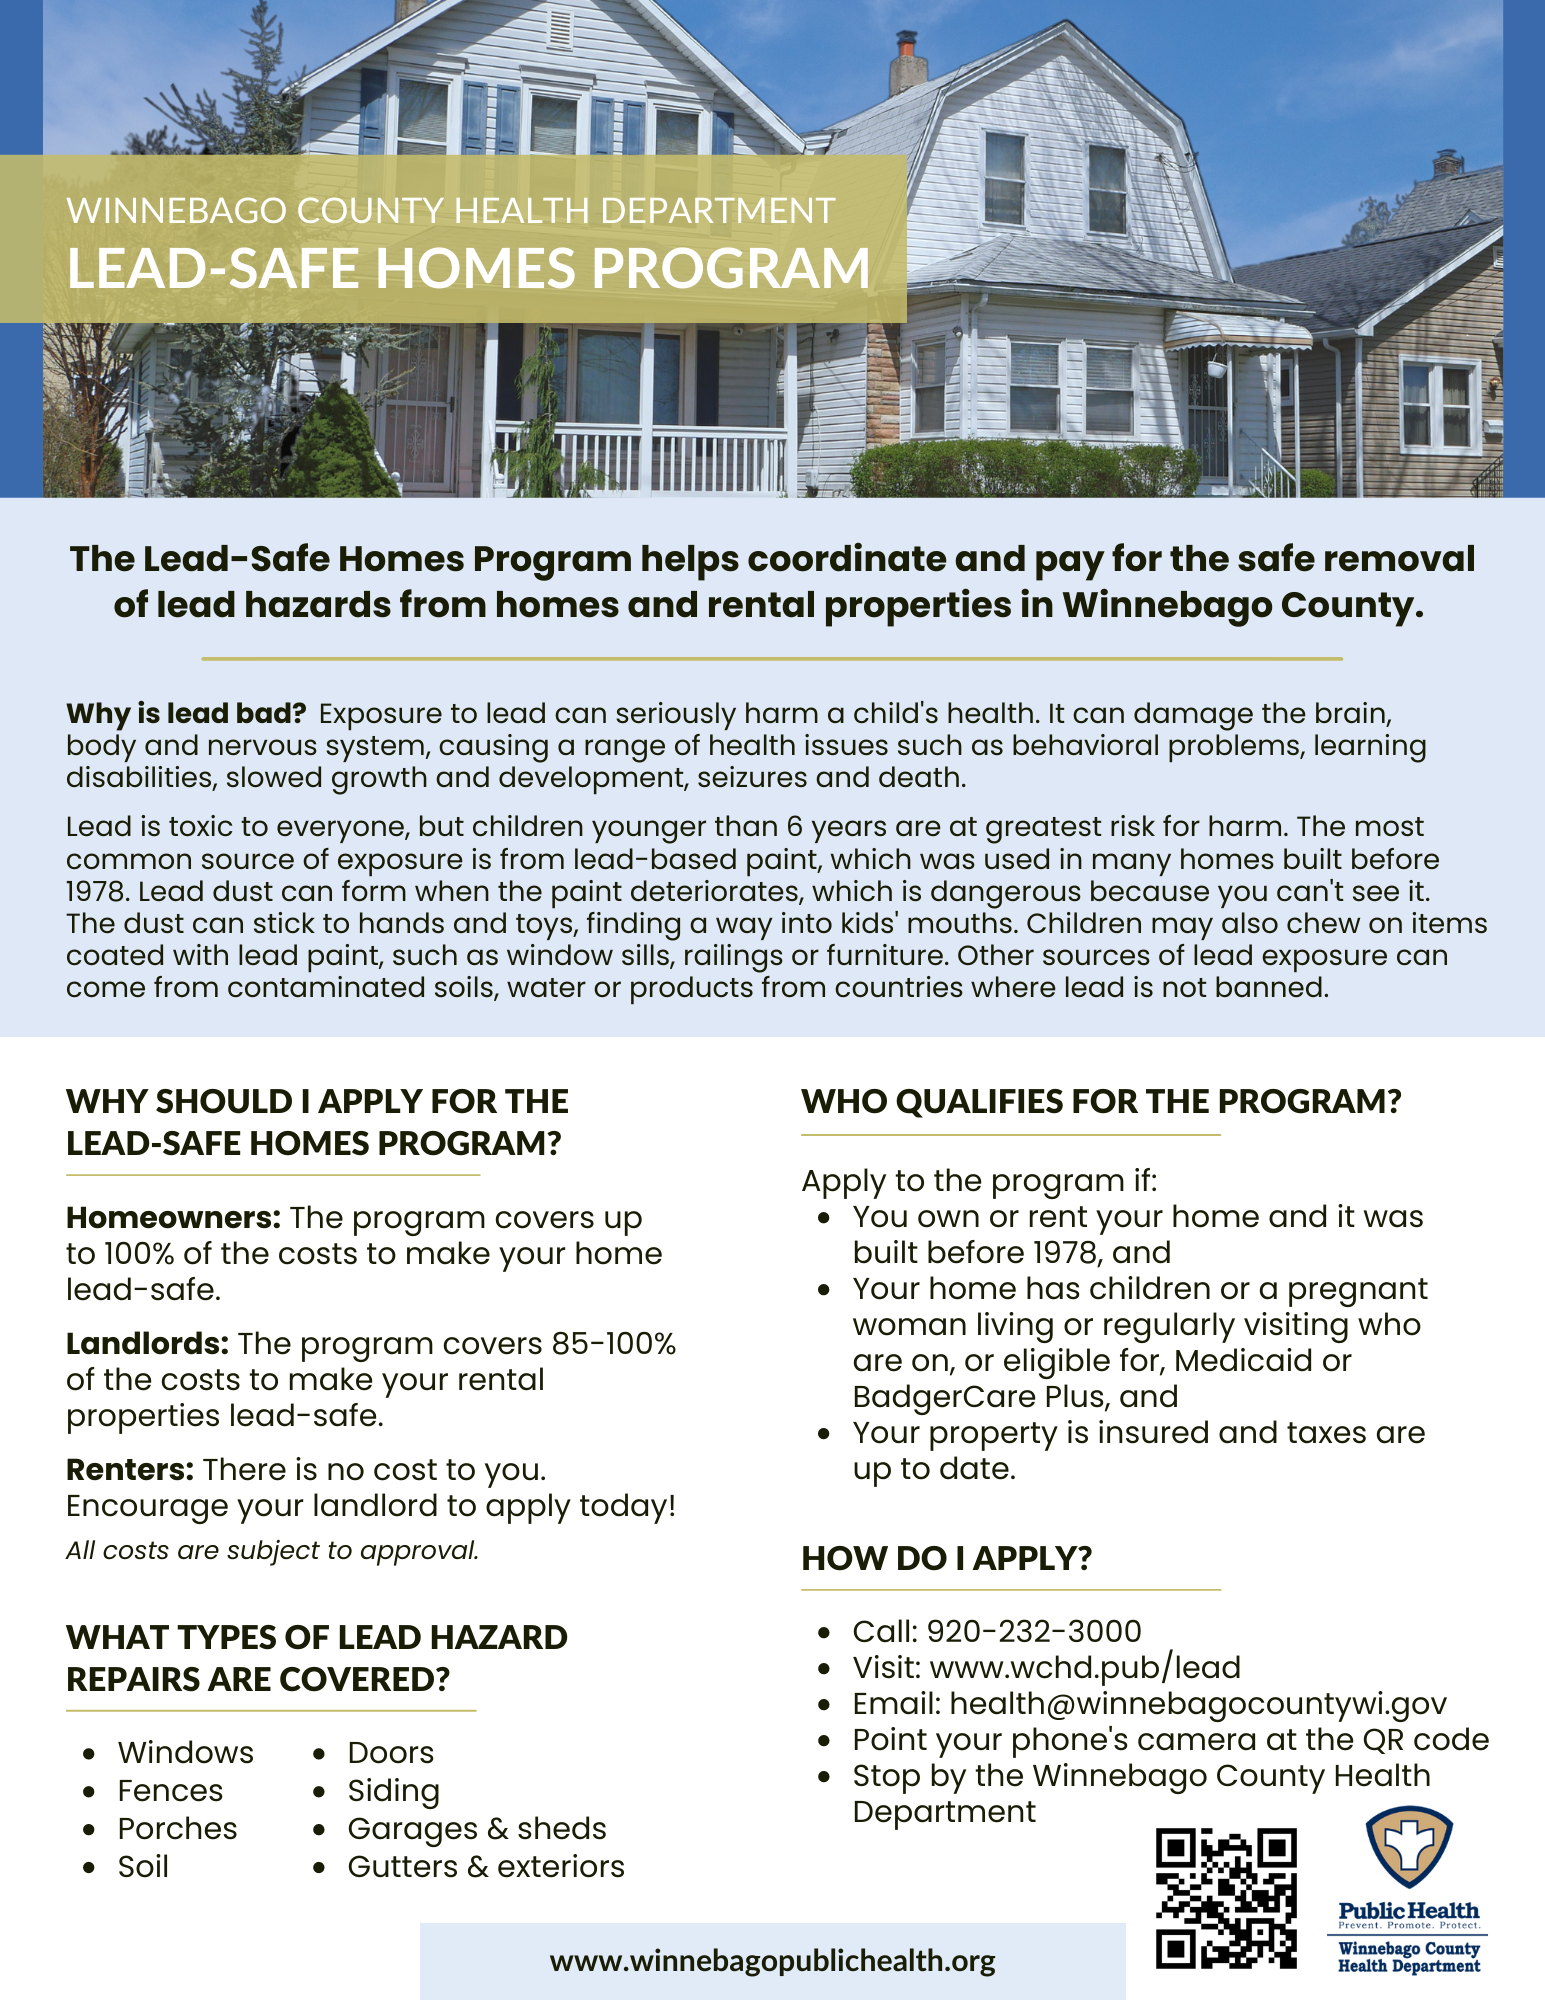 leadsafehomes image